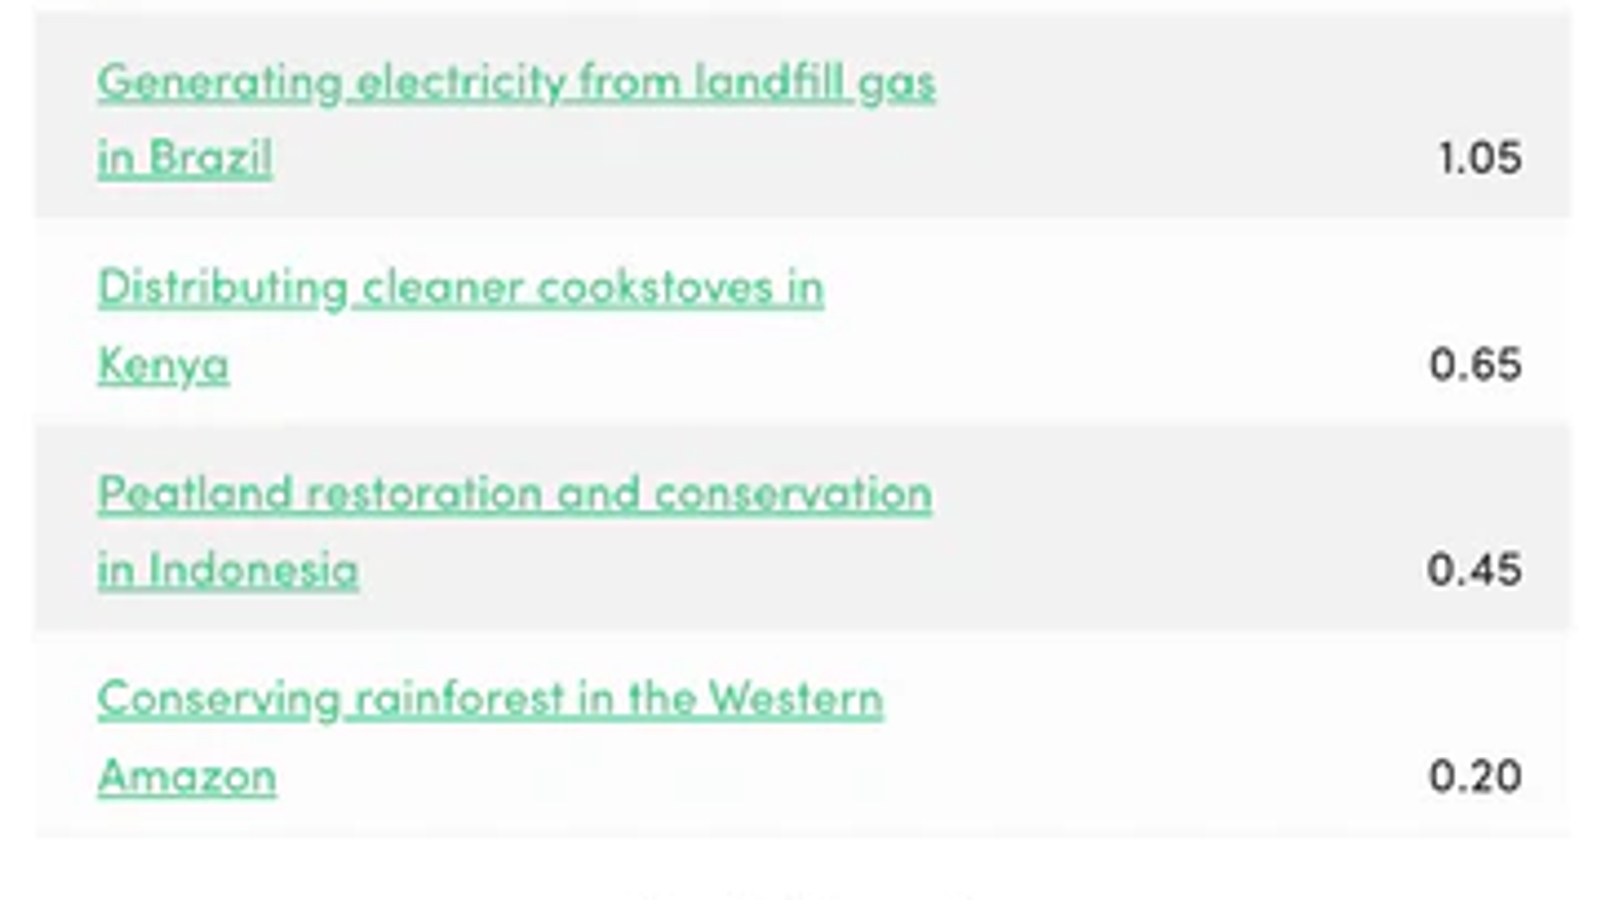 A screenshot of a list of carbon offset projects Canopey has supported including a wind power project in Thailand and generating electricity from landfill gas in Brazil